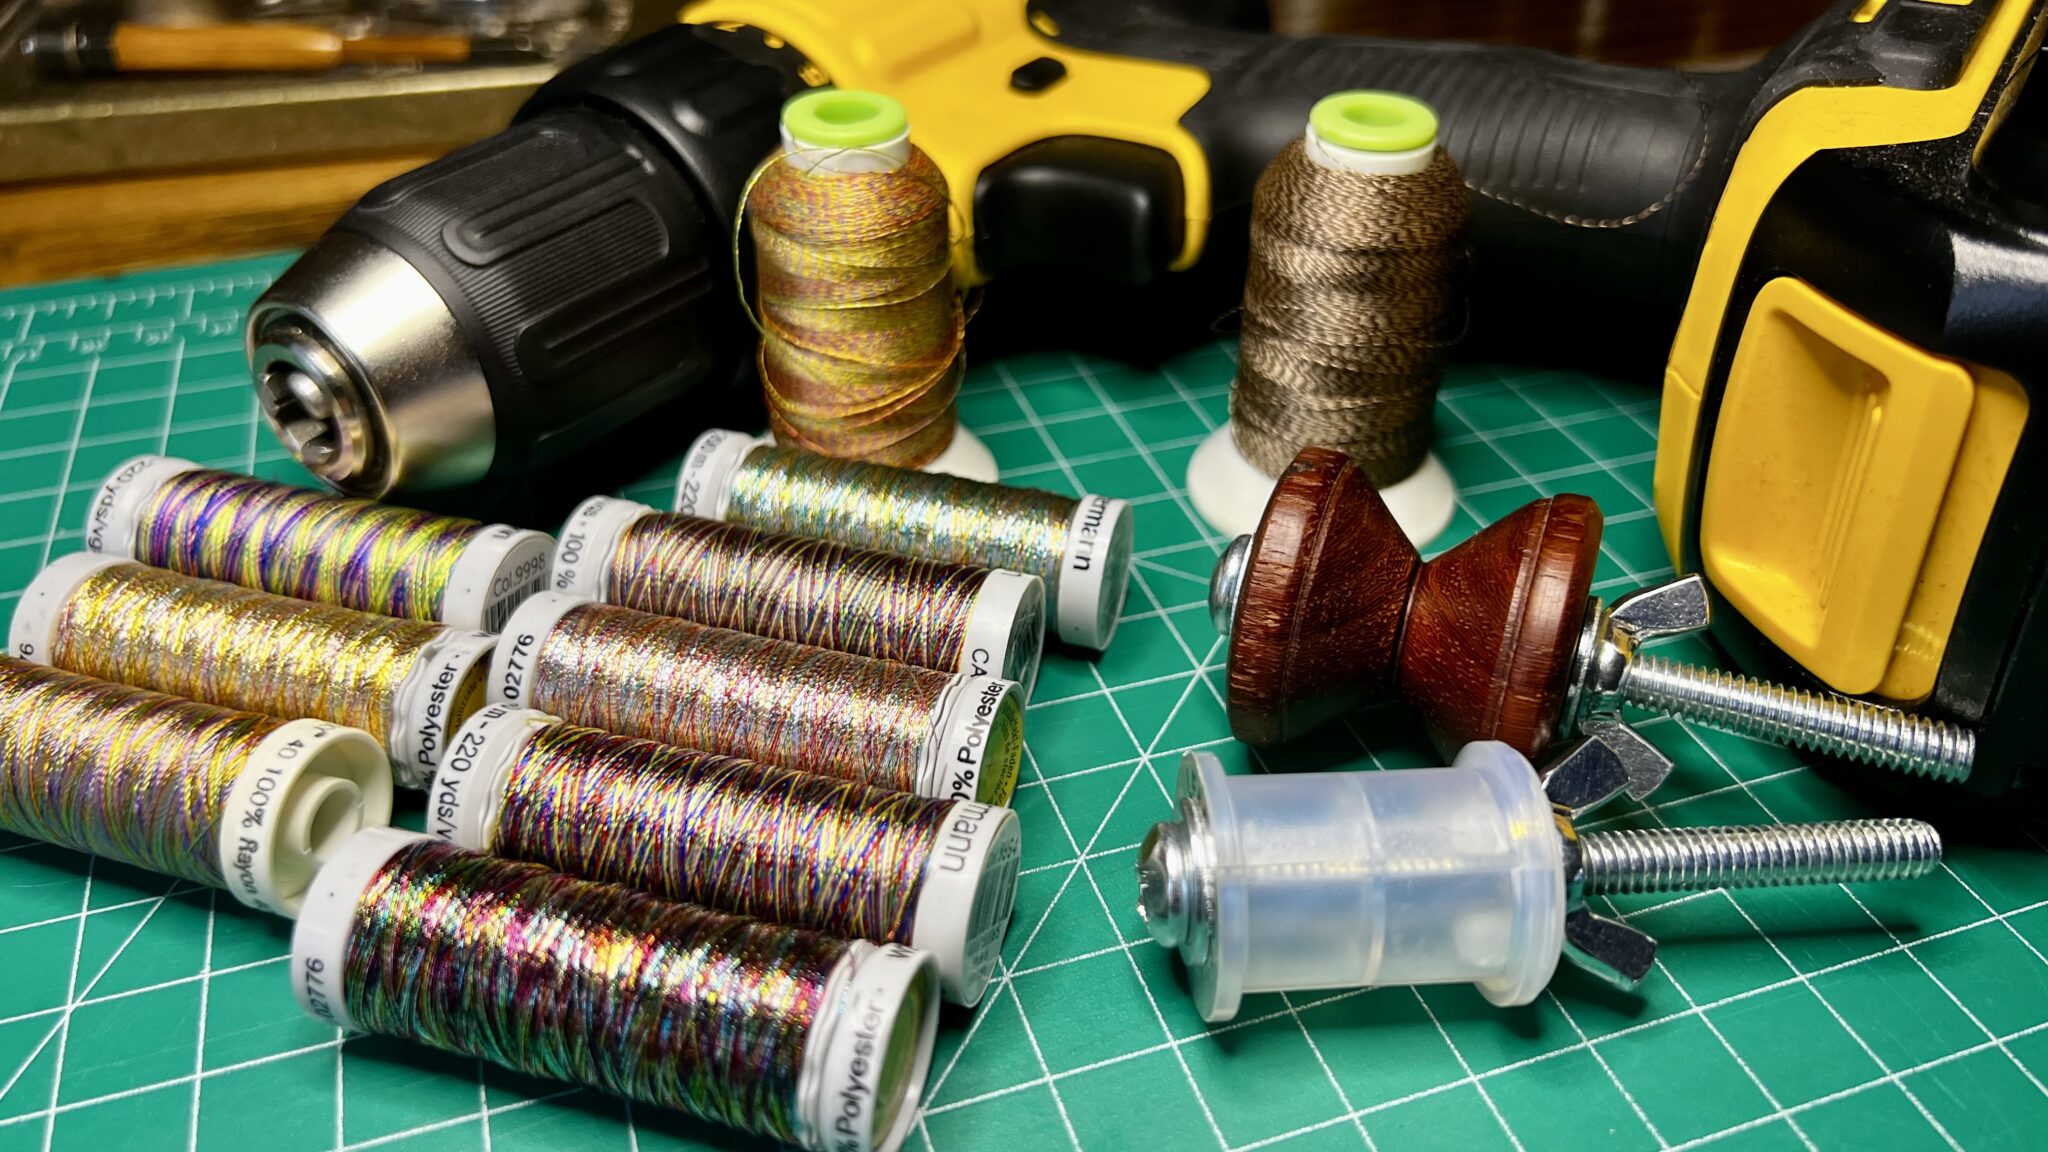 How to respool embroidery thread